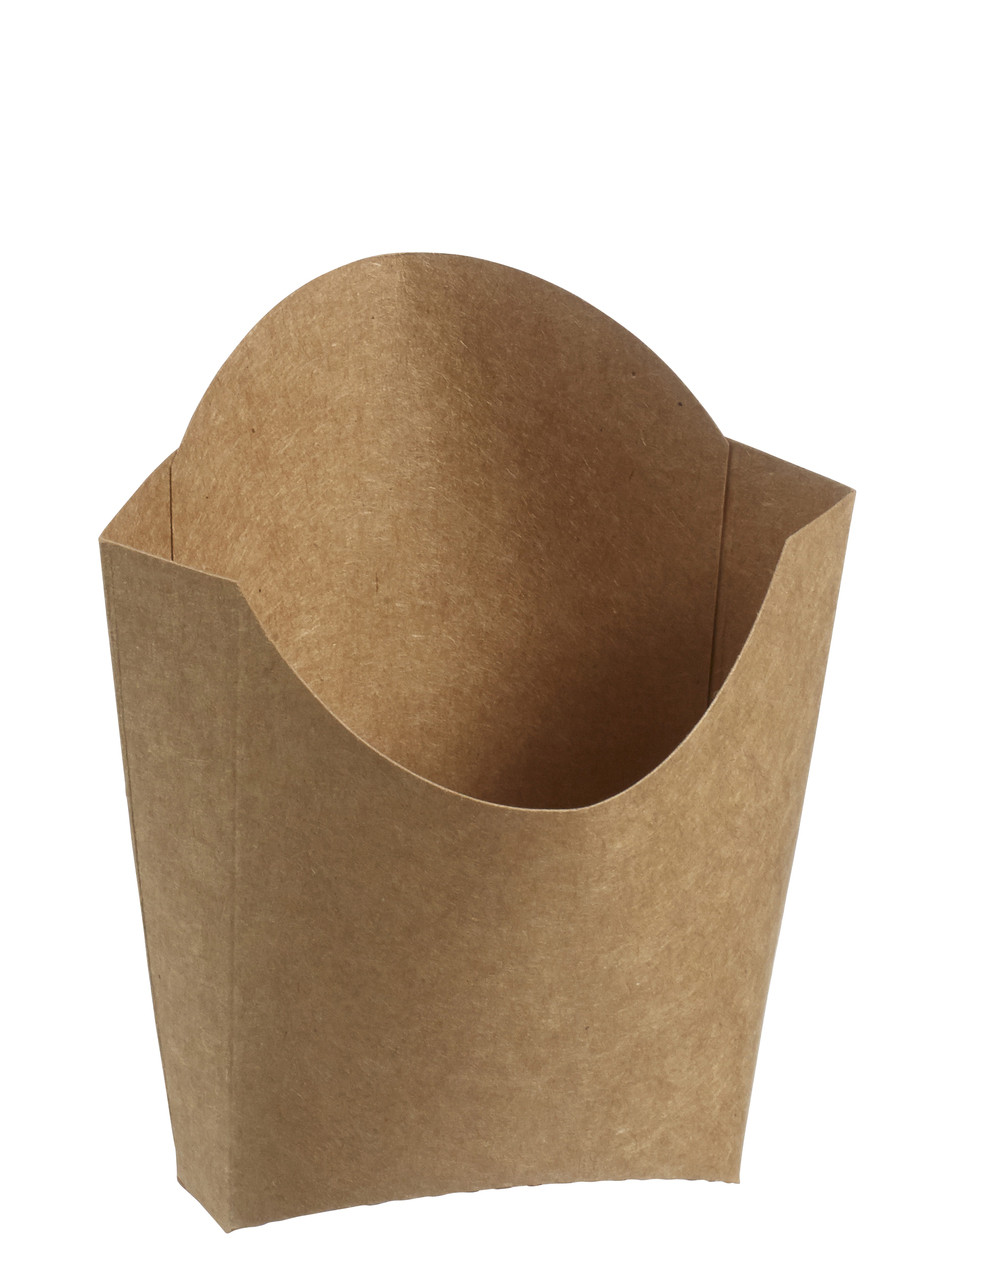 XZJMY 60 Pack 5oz French Fry Containers,Disposable Paperboard French Fries Containers,French Fries Holders, Small Kraft Paper Takeout Boxes for